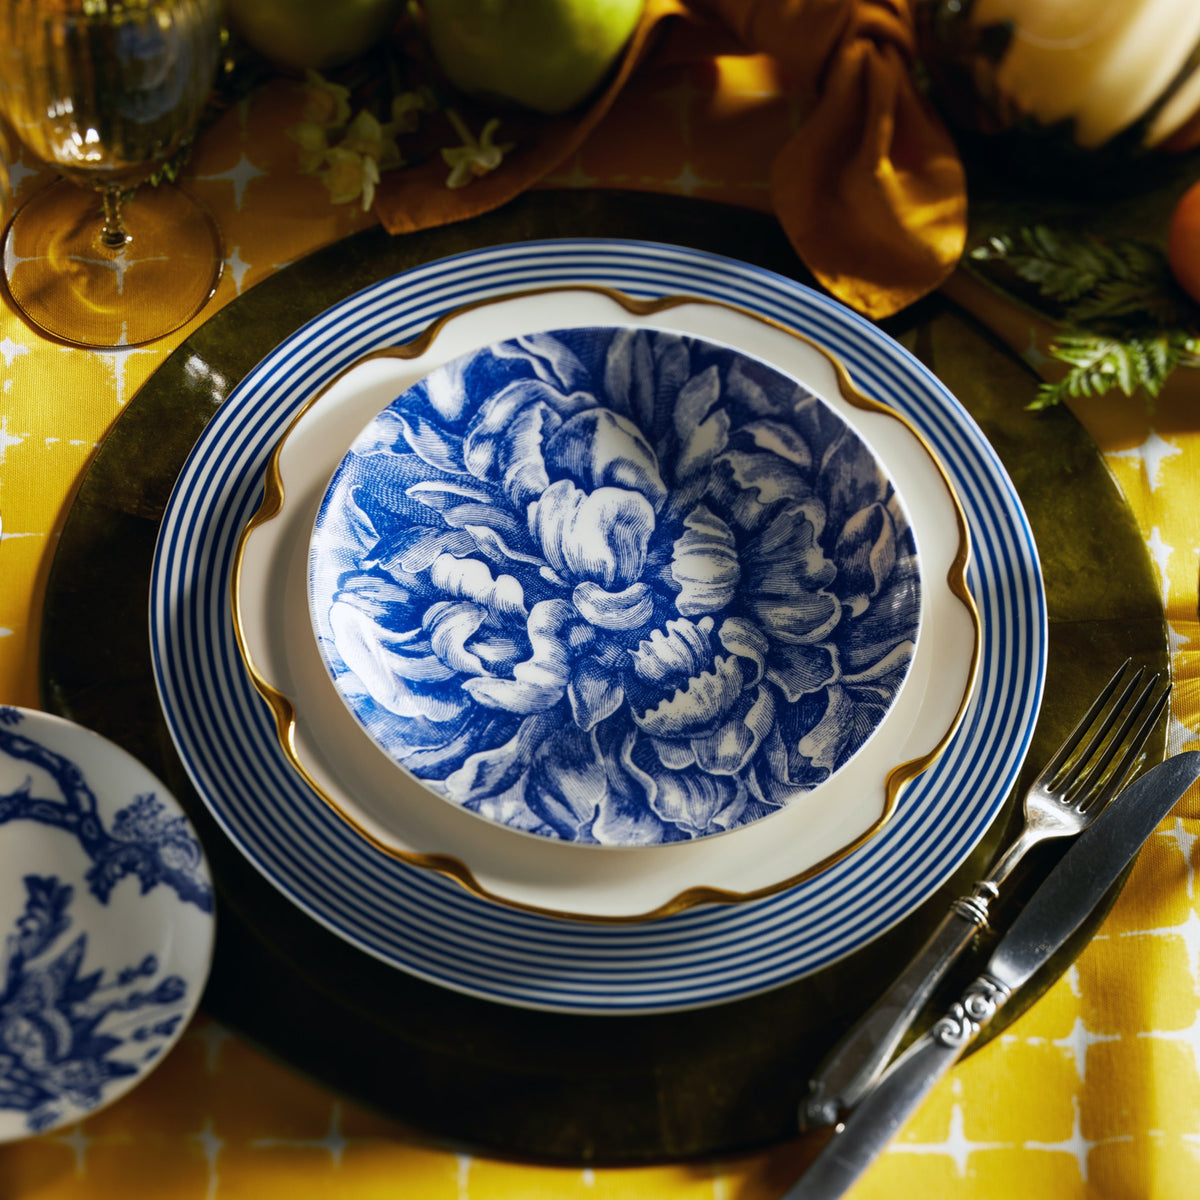 The Peony Blue Full Bloom Canapé Plate (sold as a set of four small plates) is shown as a part of a mixed blue, white and gold place setting.